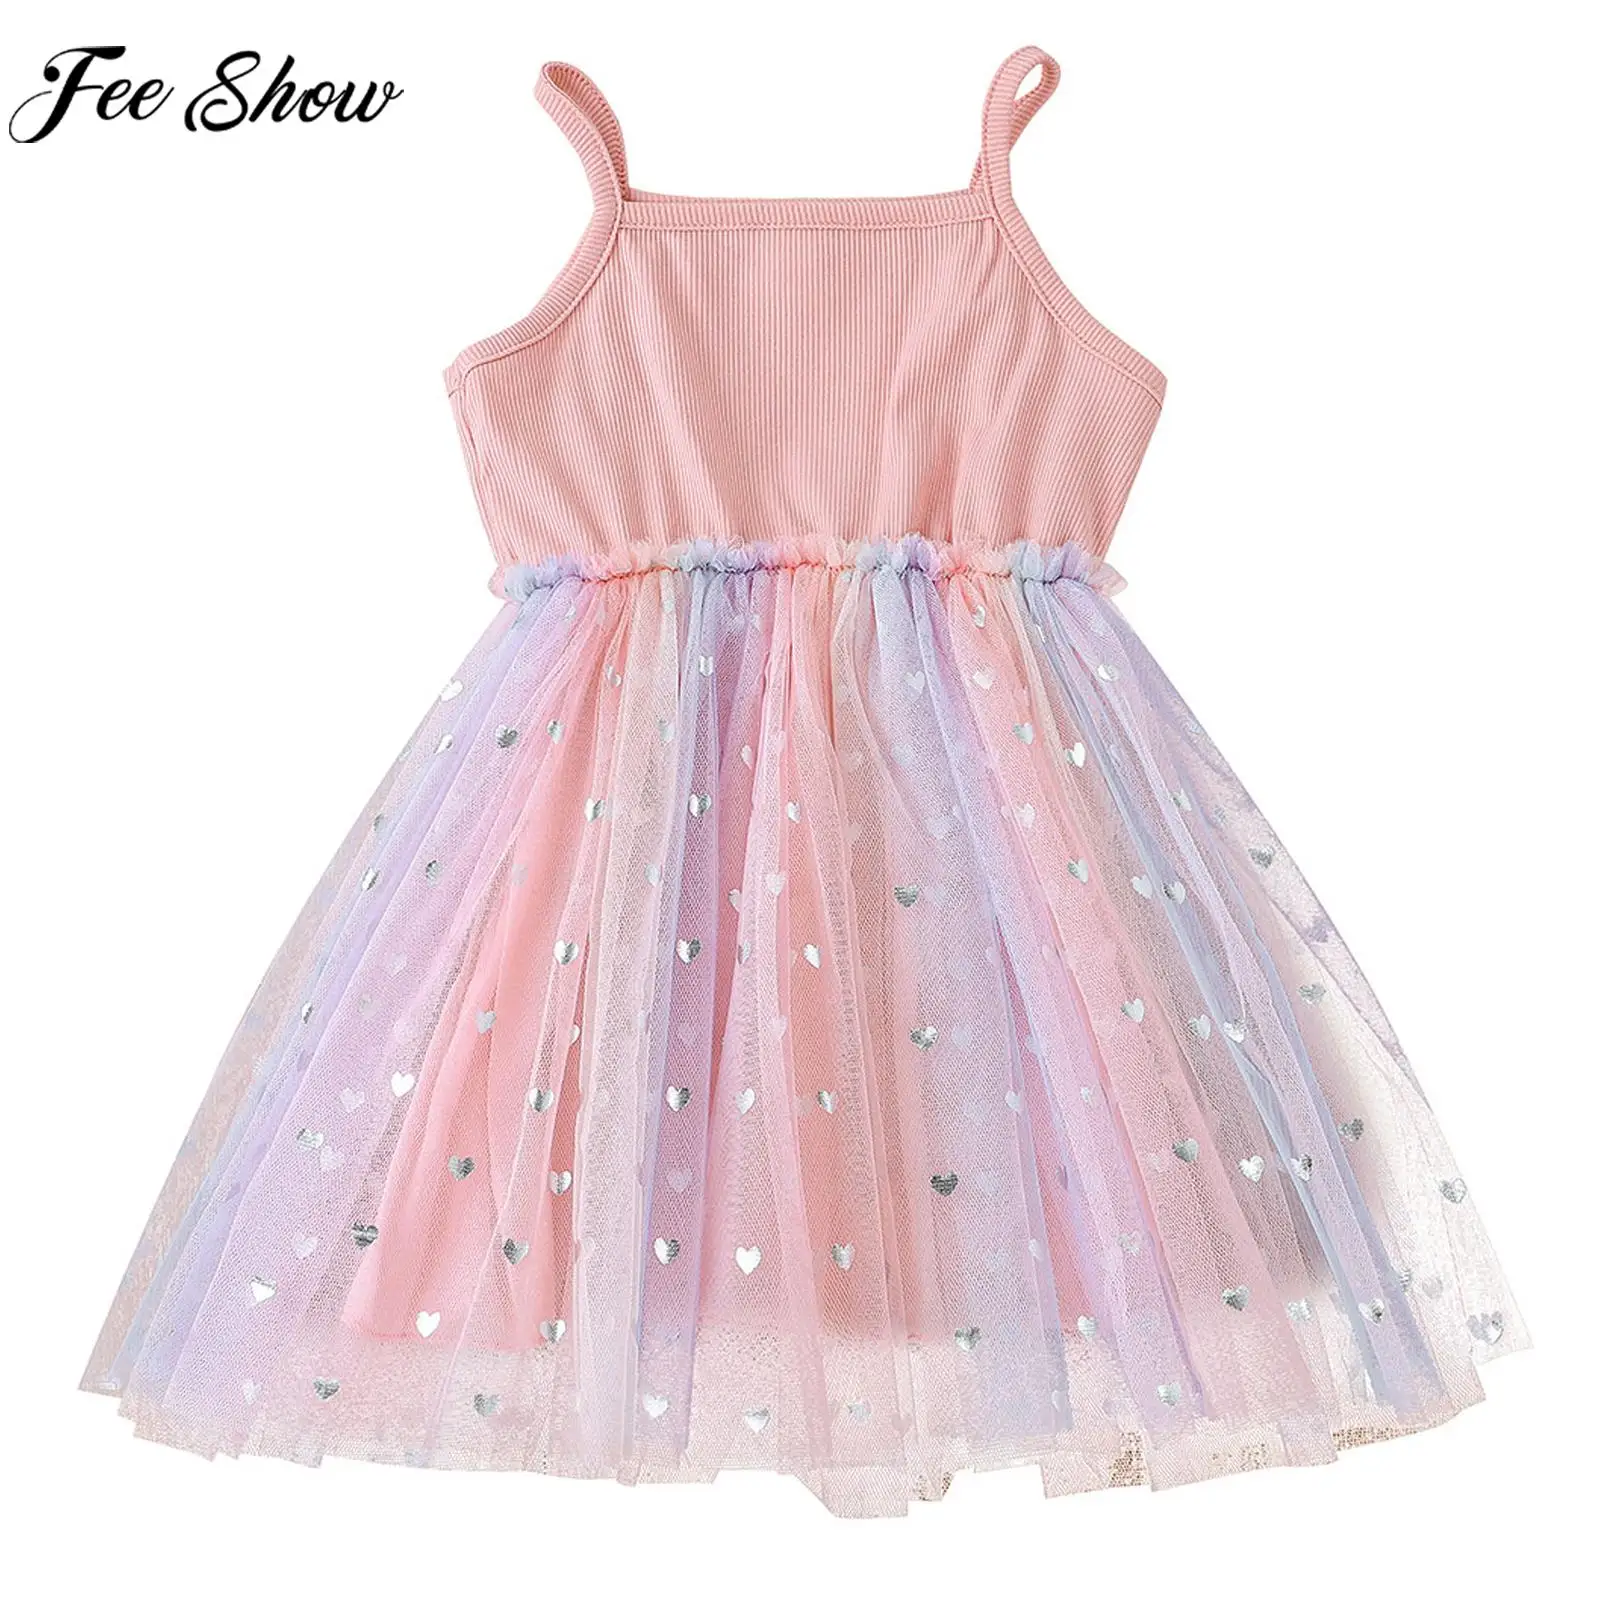 

Toddler Girls Summer Casual Dress Sleeveless Sequin Preppy StyleMesh Tutu Suspenders Dresses for Birthday Party Daily Vacation